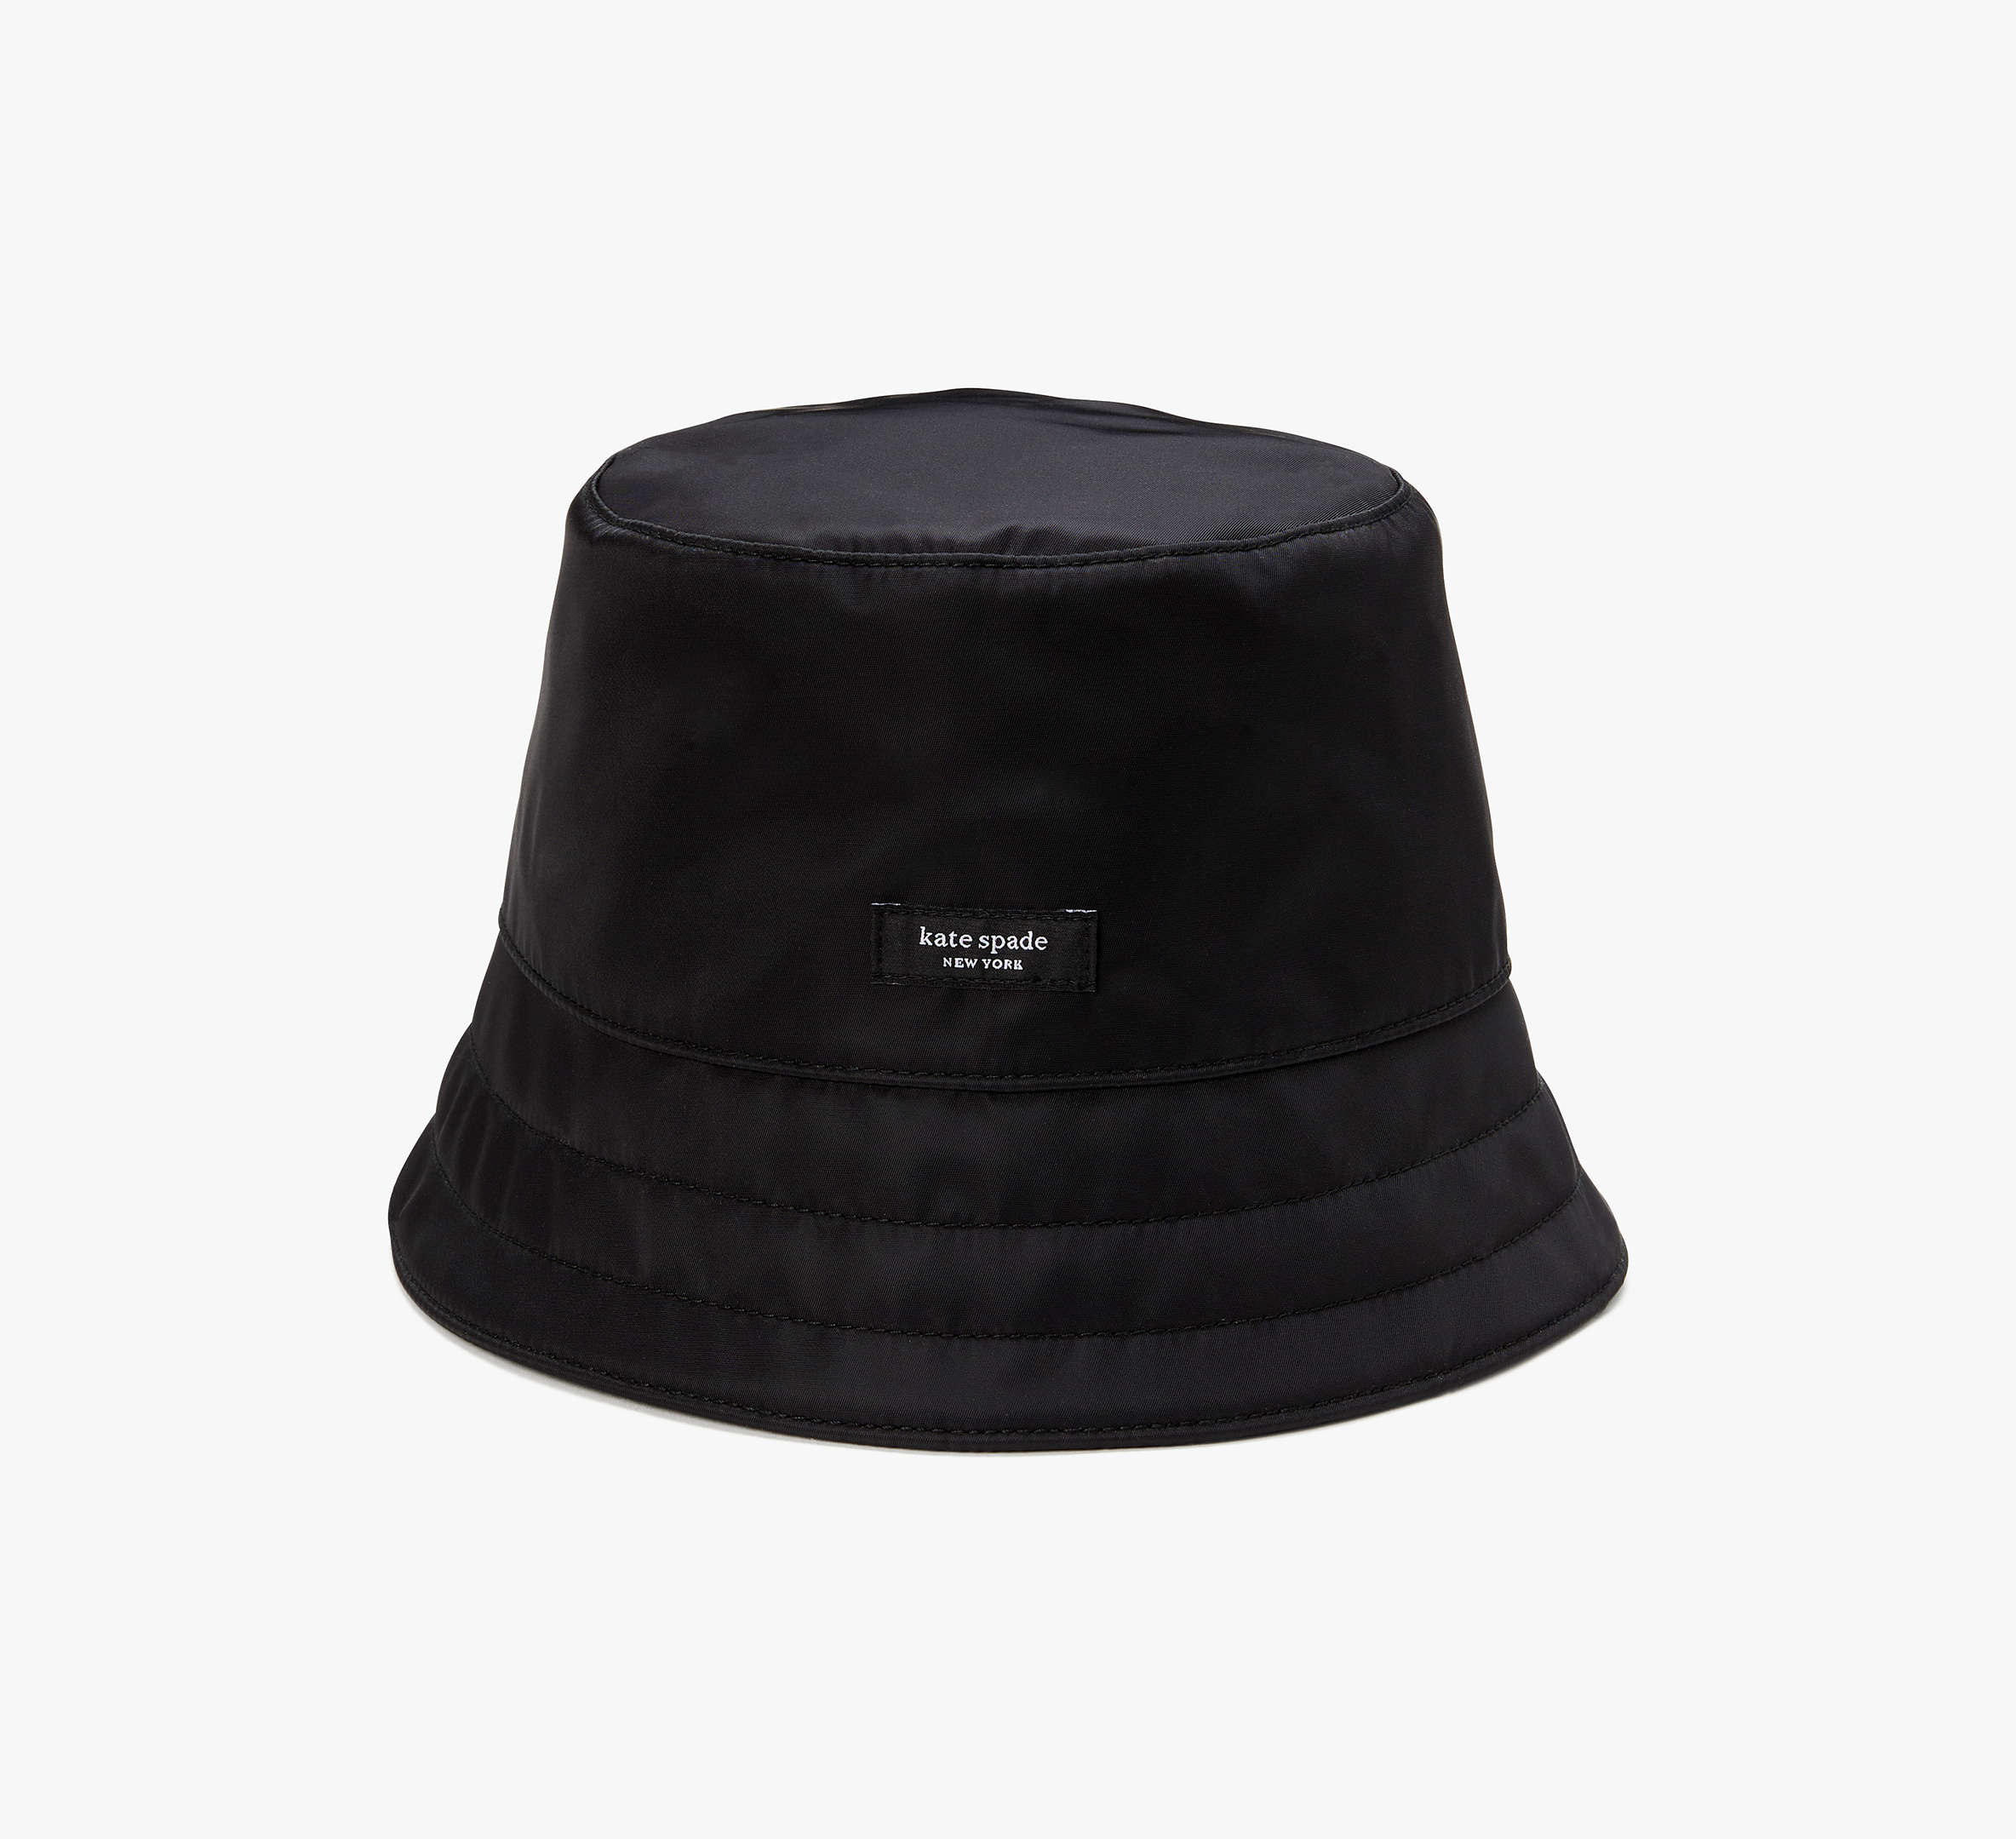 KATE SPADE SAM ICON PACKABLE BUCKET HAT